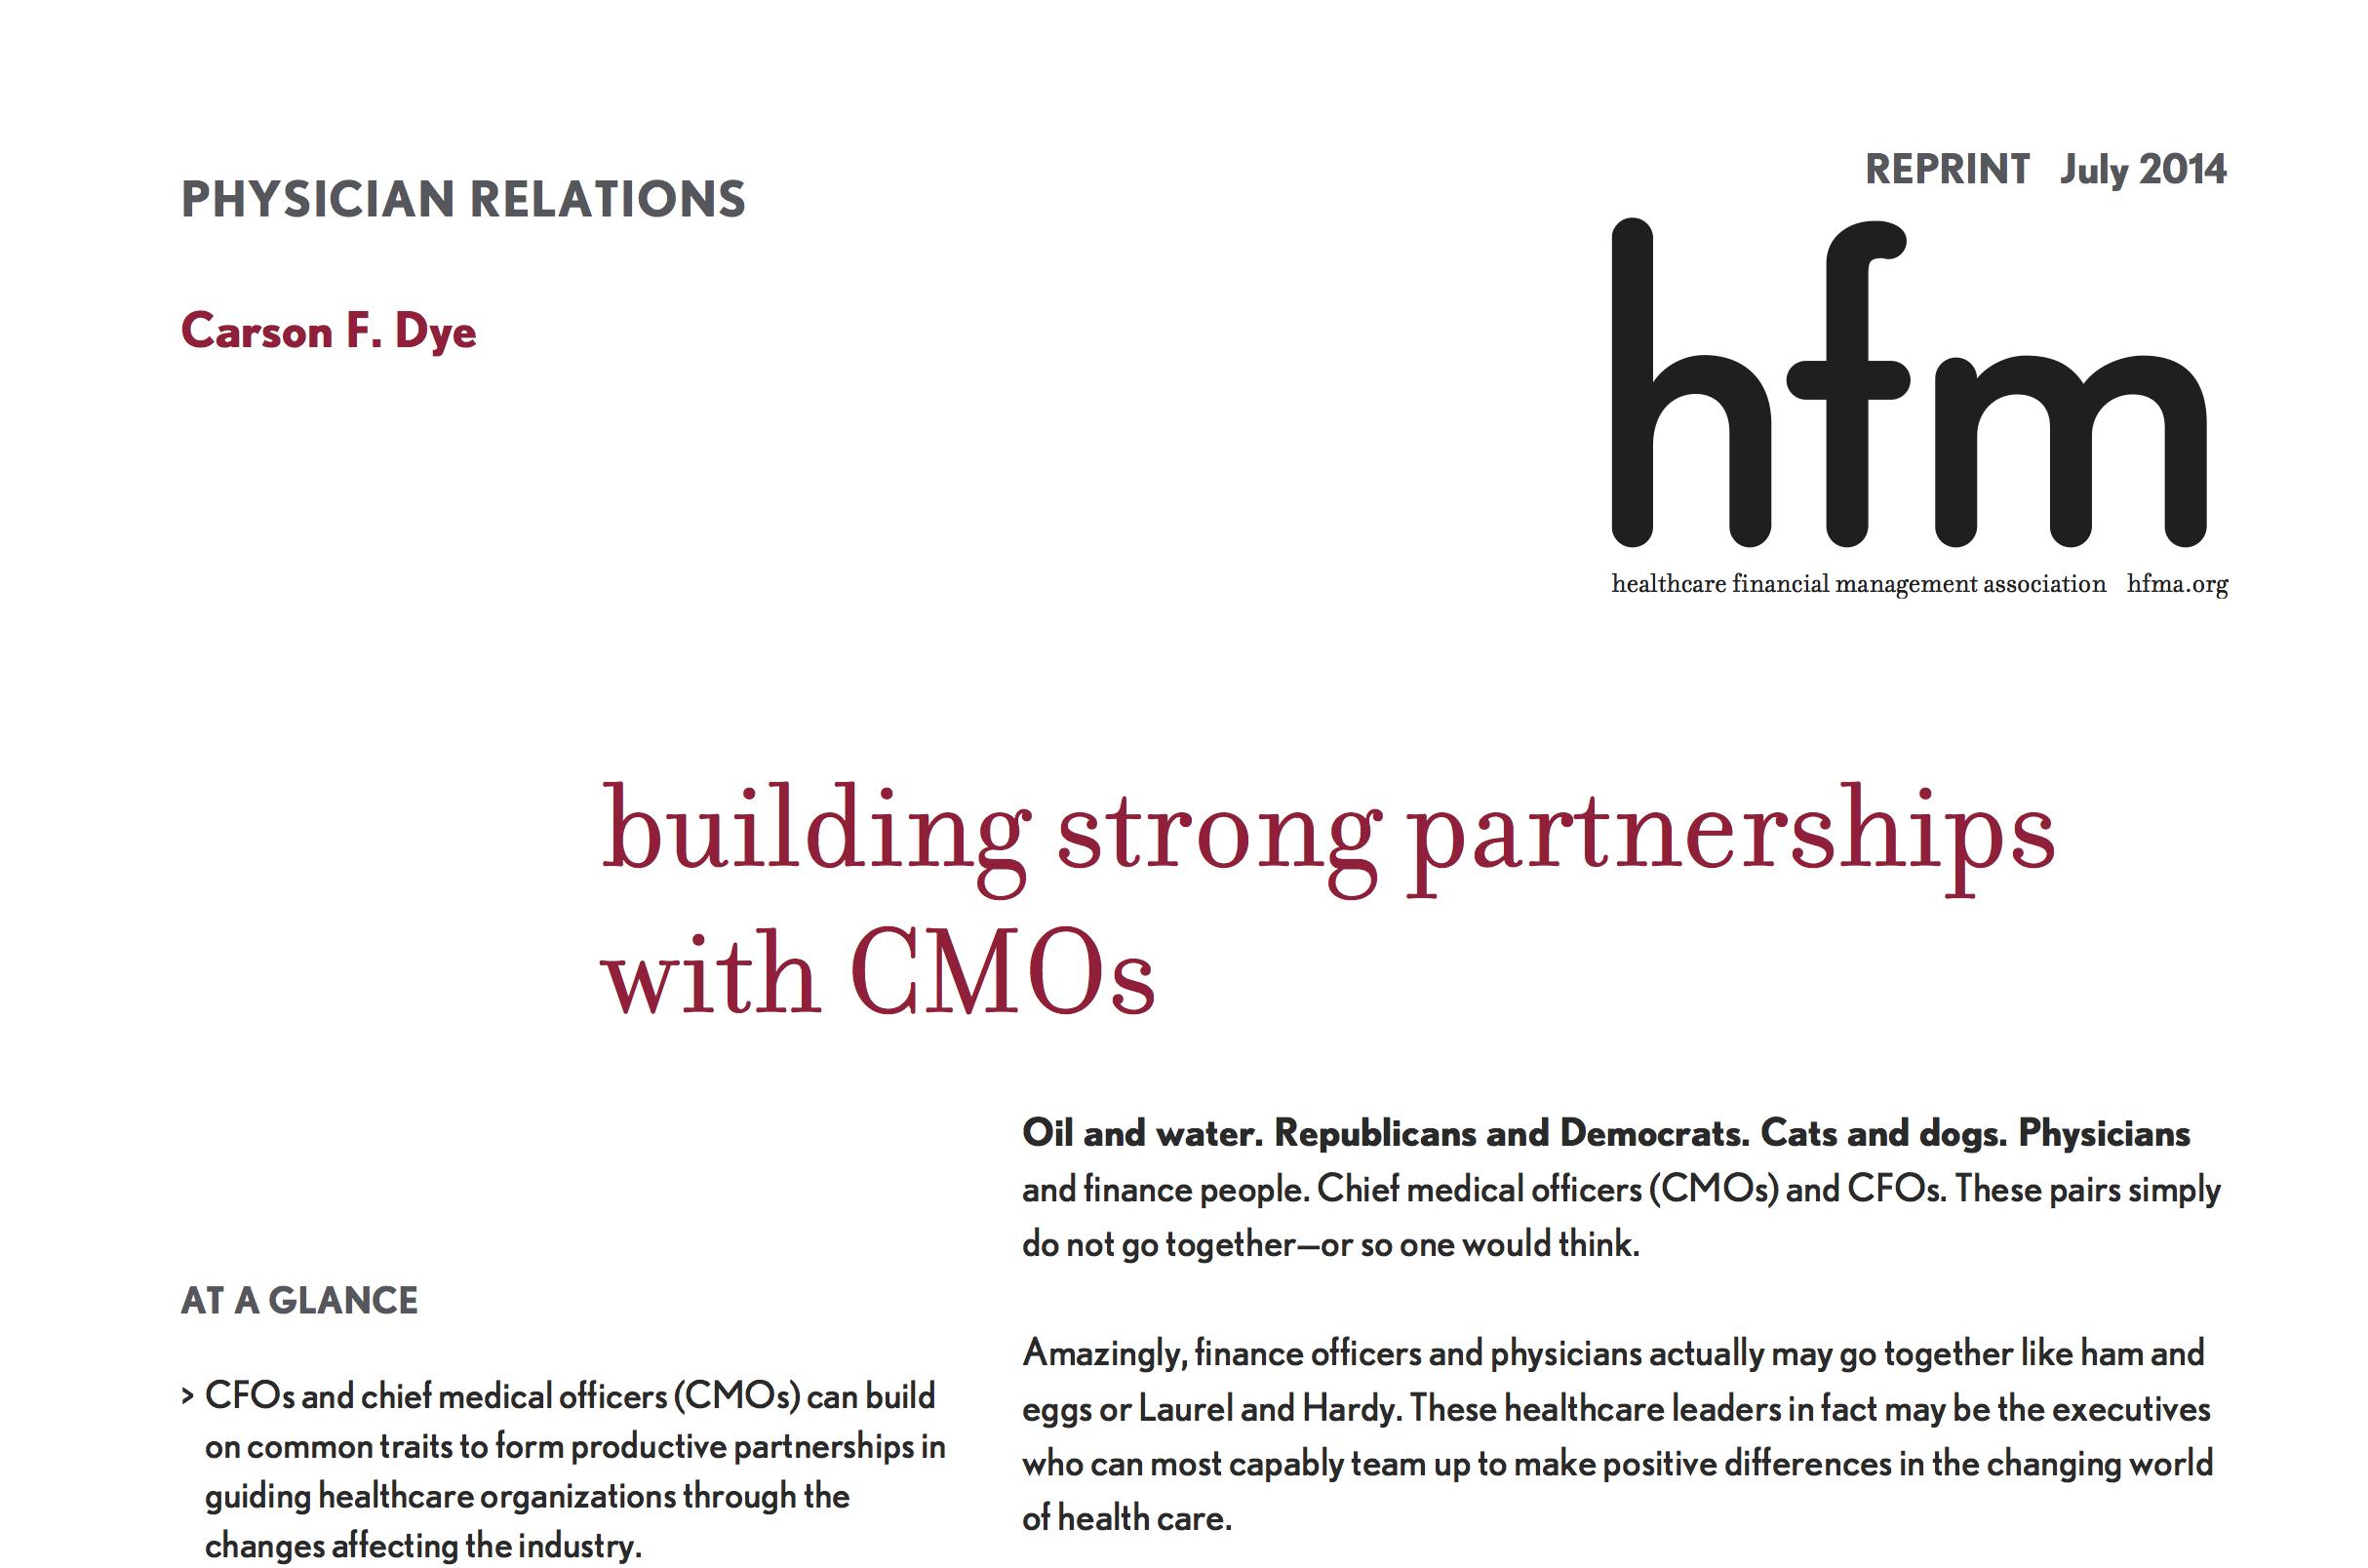 hfm reprint July 2014 - building strong partnerships with CMOs